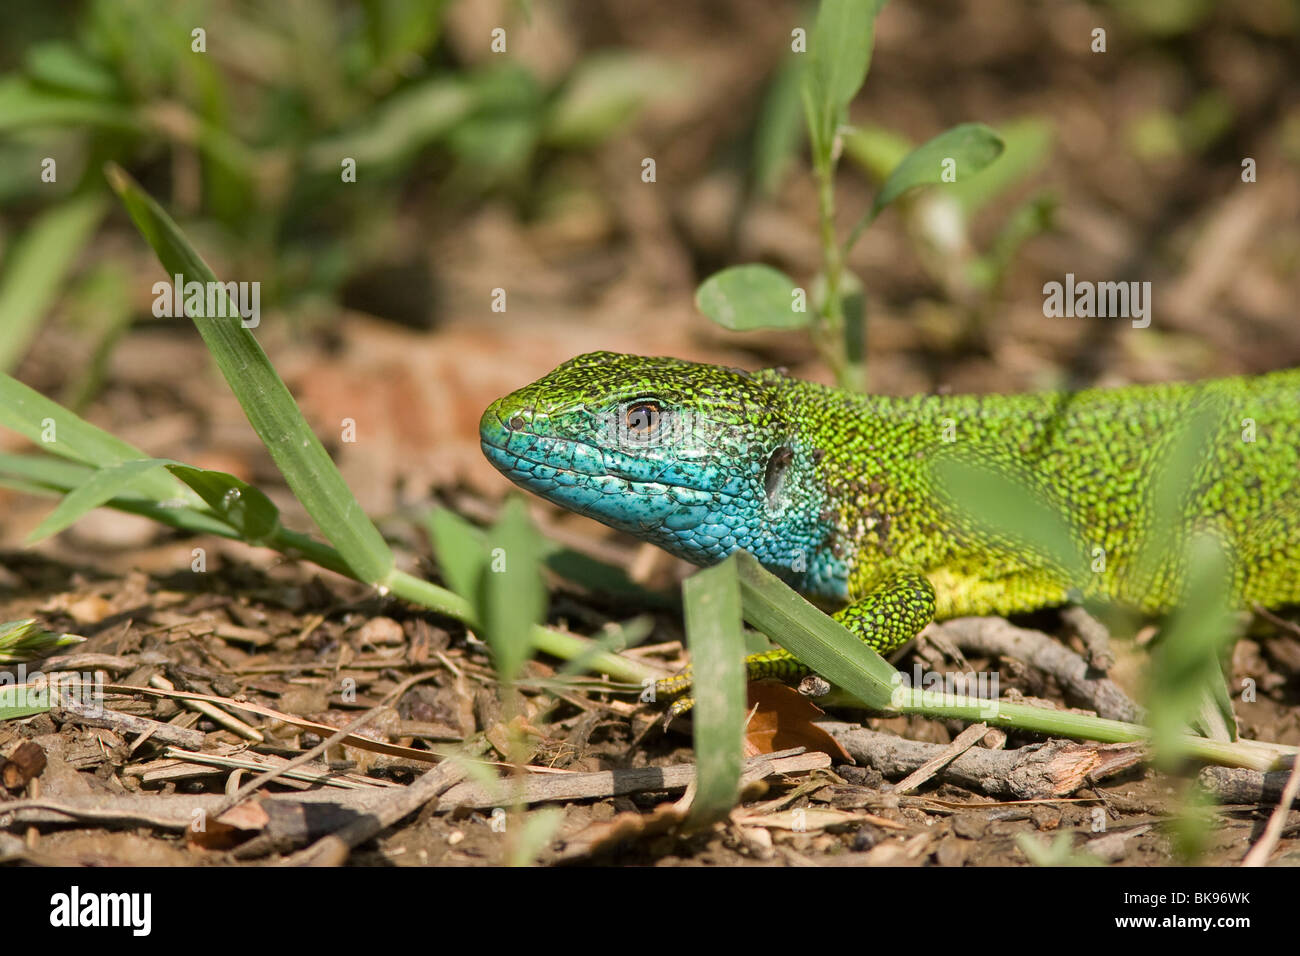 Close-up of the head of a male Eastern Green Lizard (Lacerta viridis) on the ground between some grass. Stock Photo